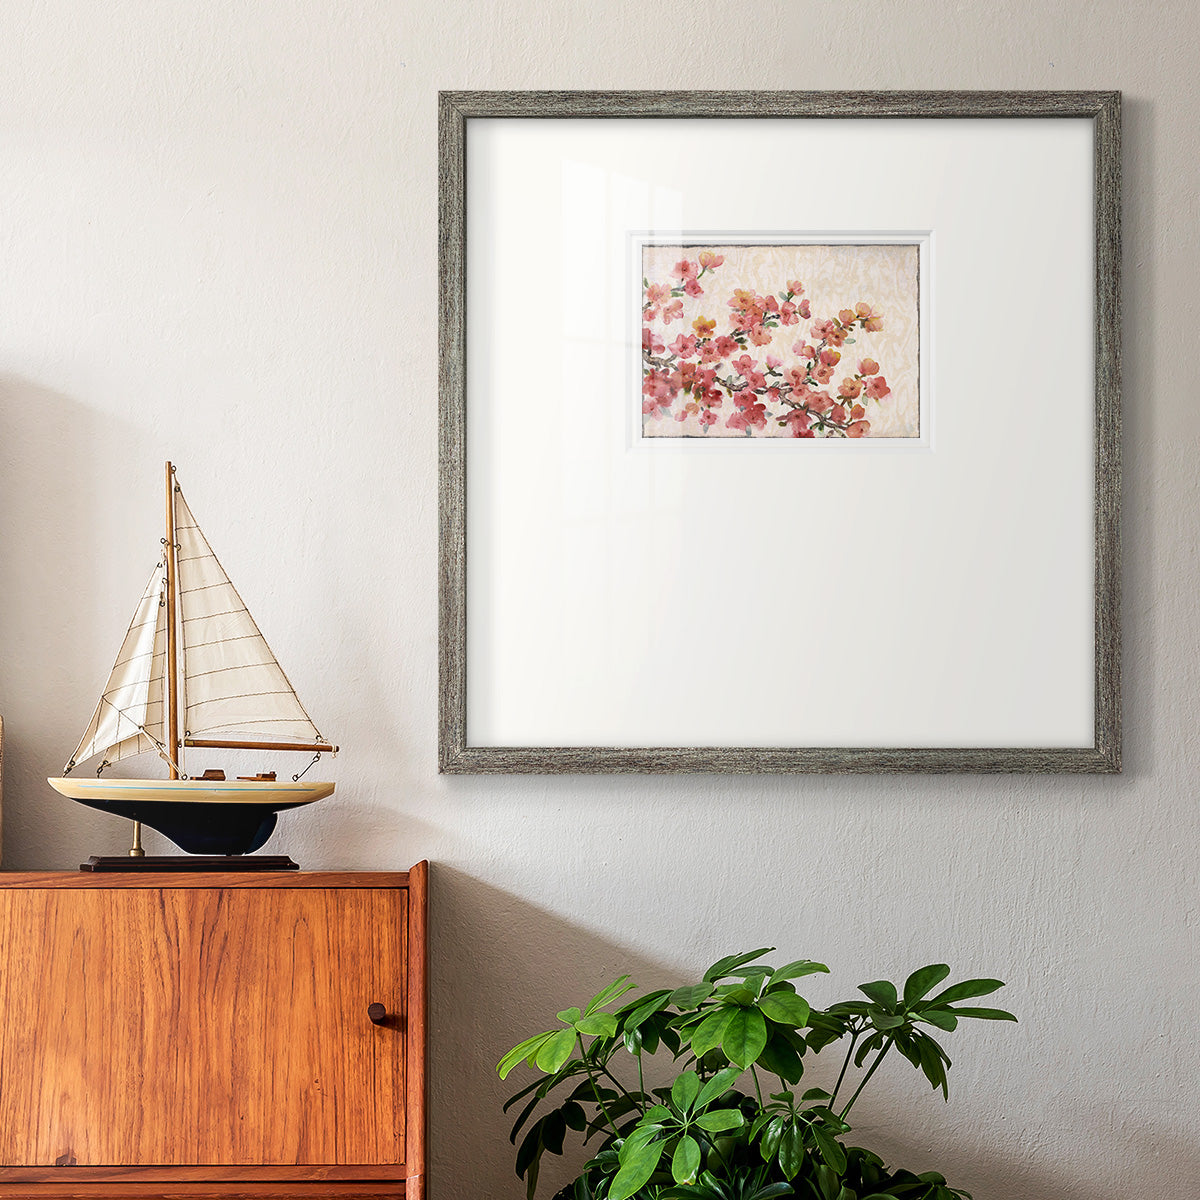 Cherry Blossom Composition II Premium Framed Print Double Matboard